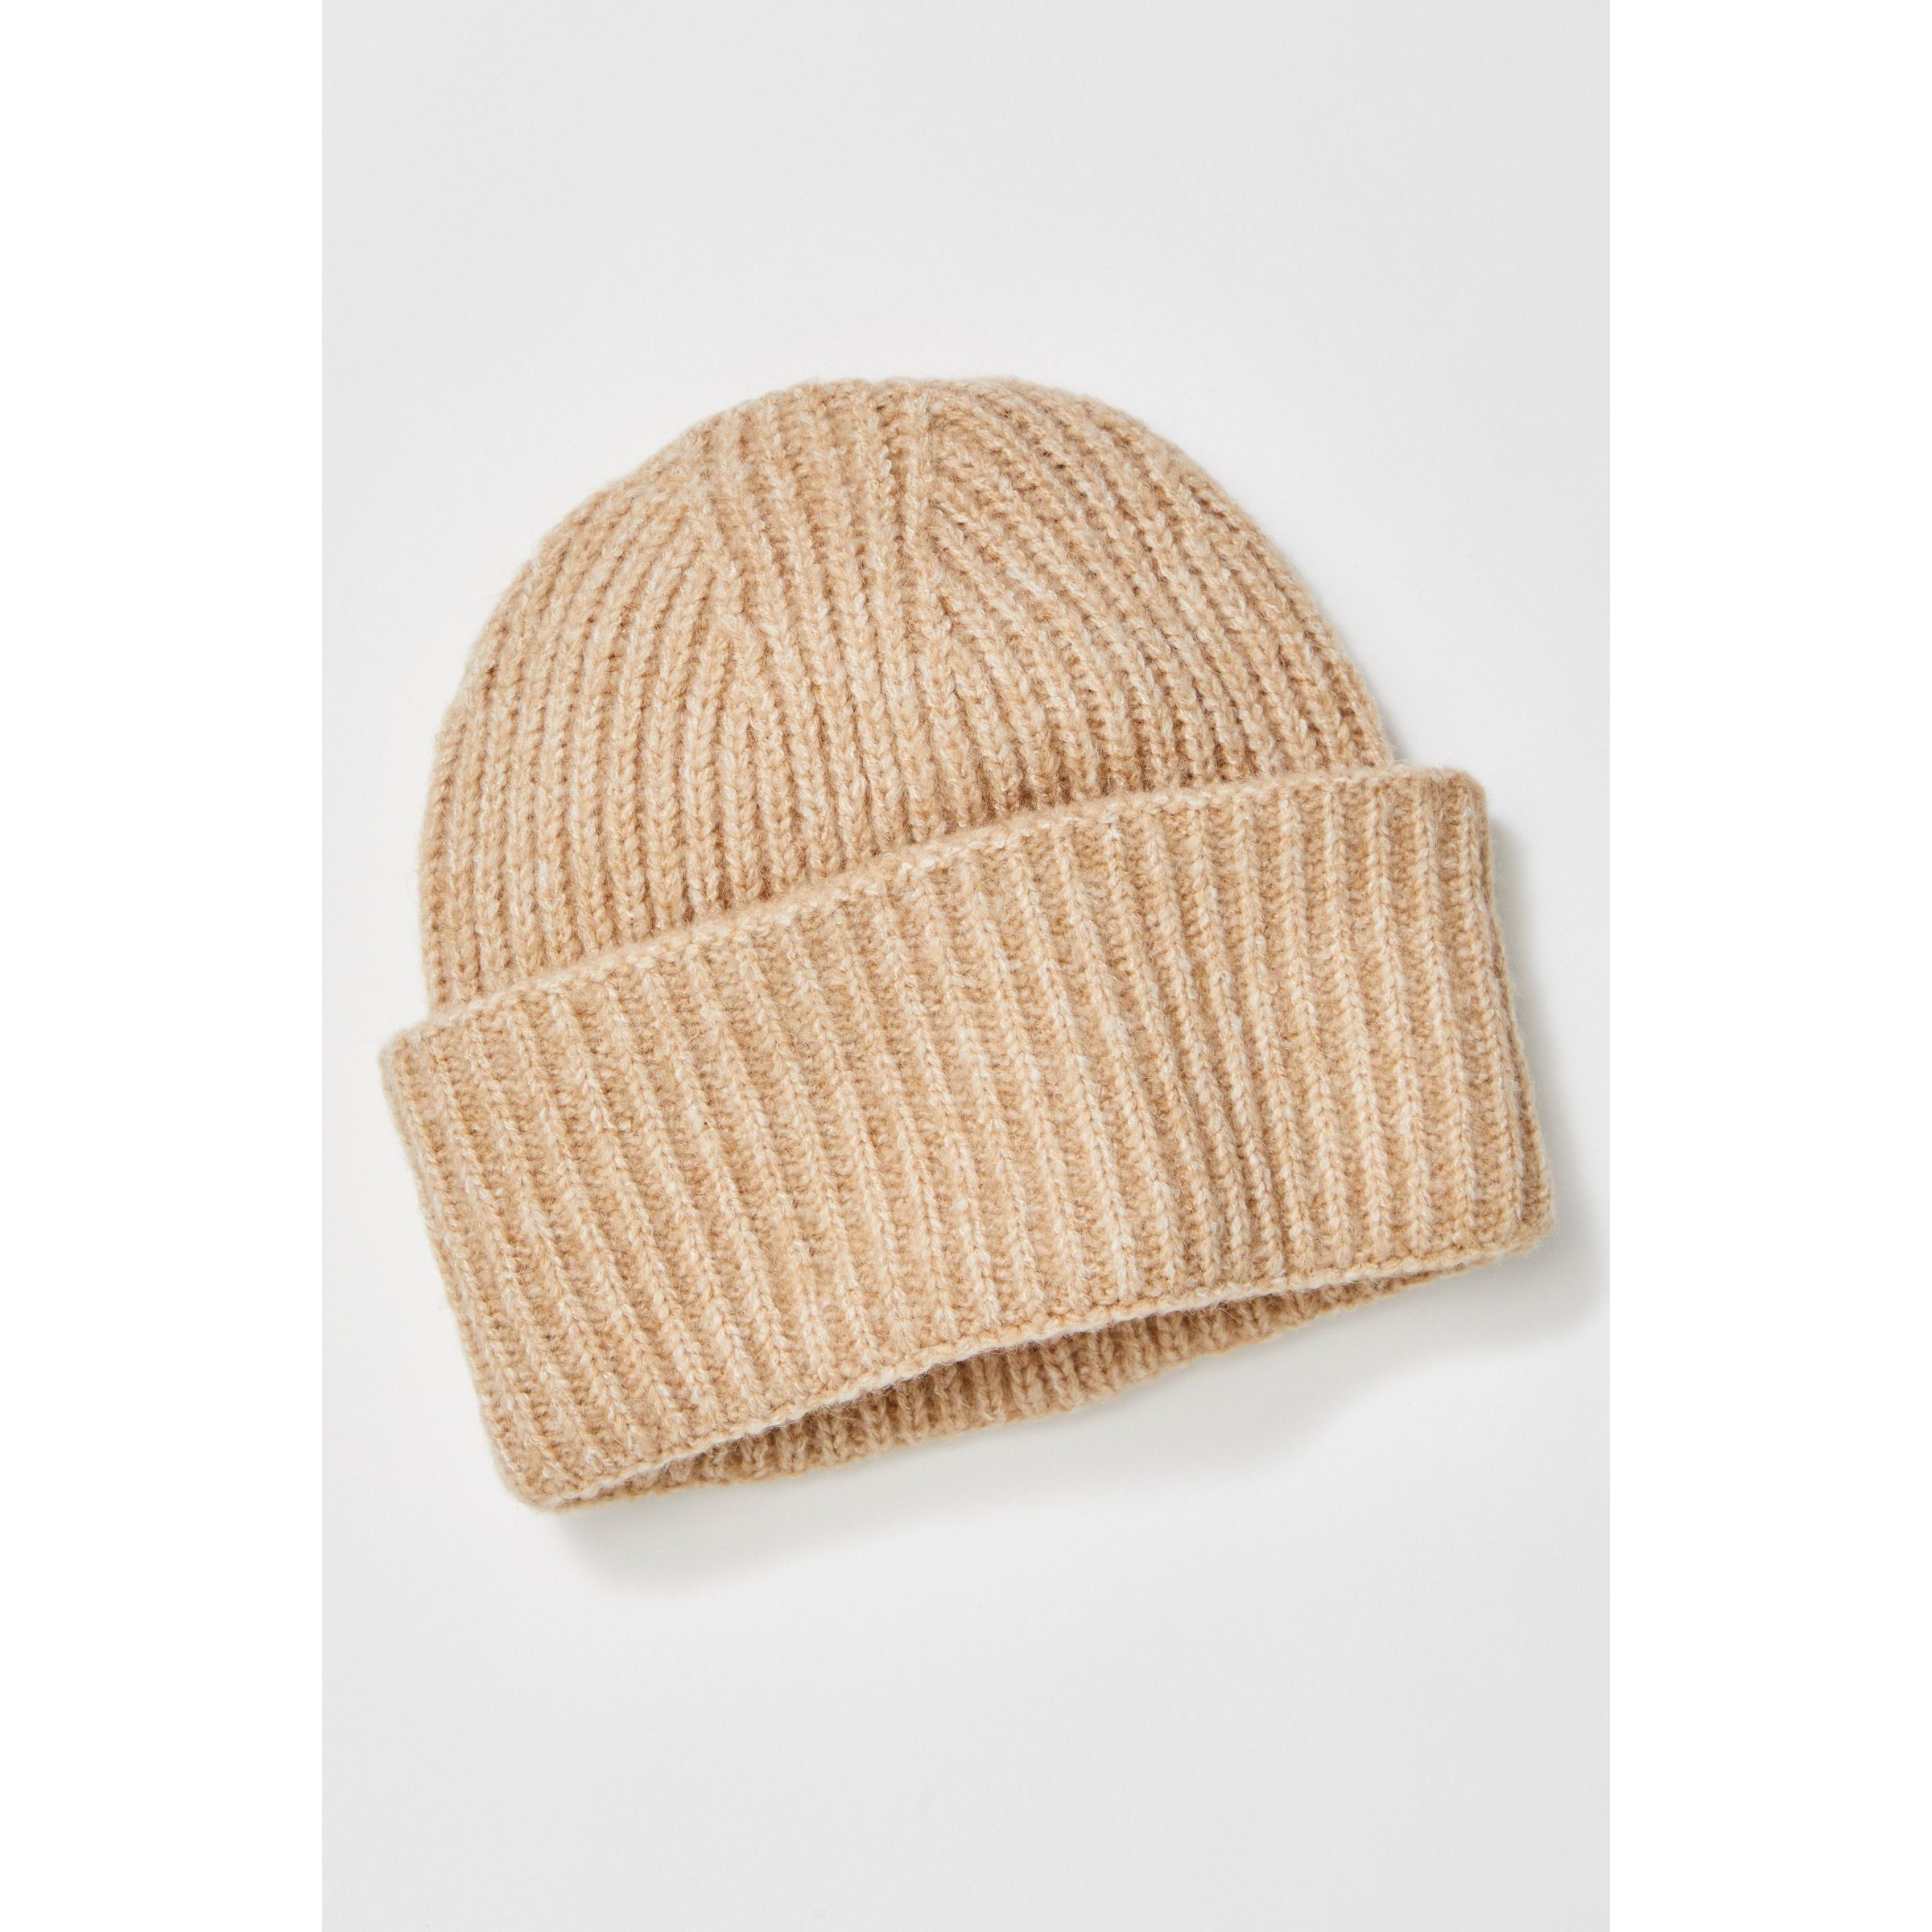 Free People - Harbor Marled Ribbed Beanie in Camel